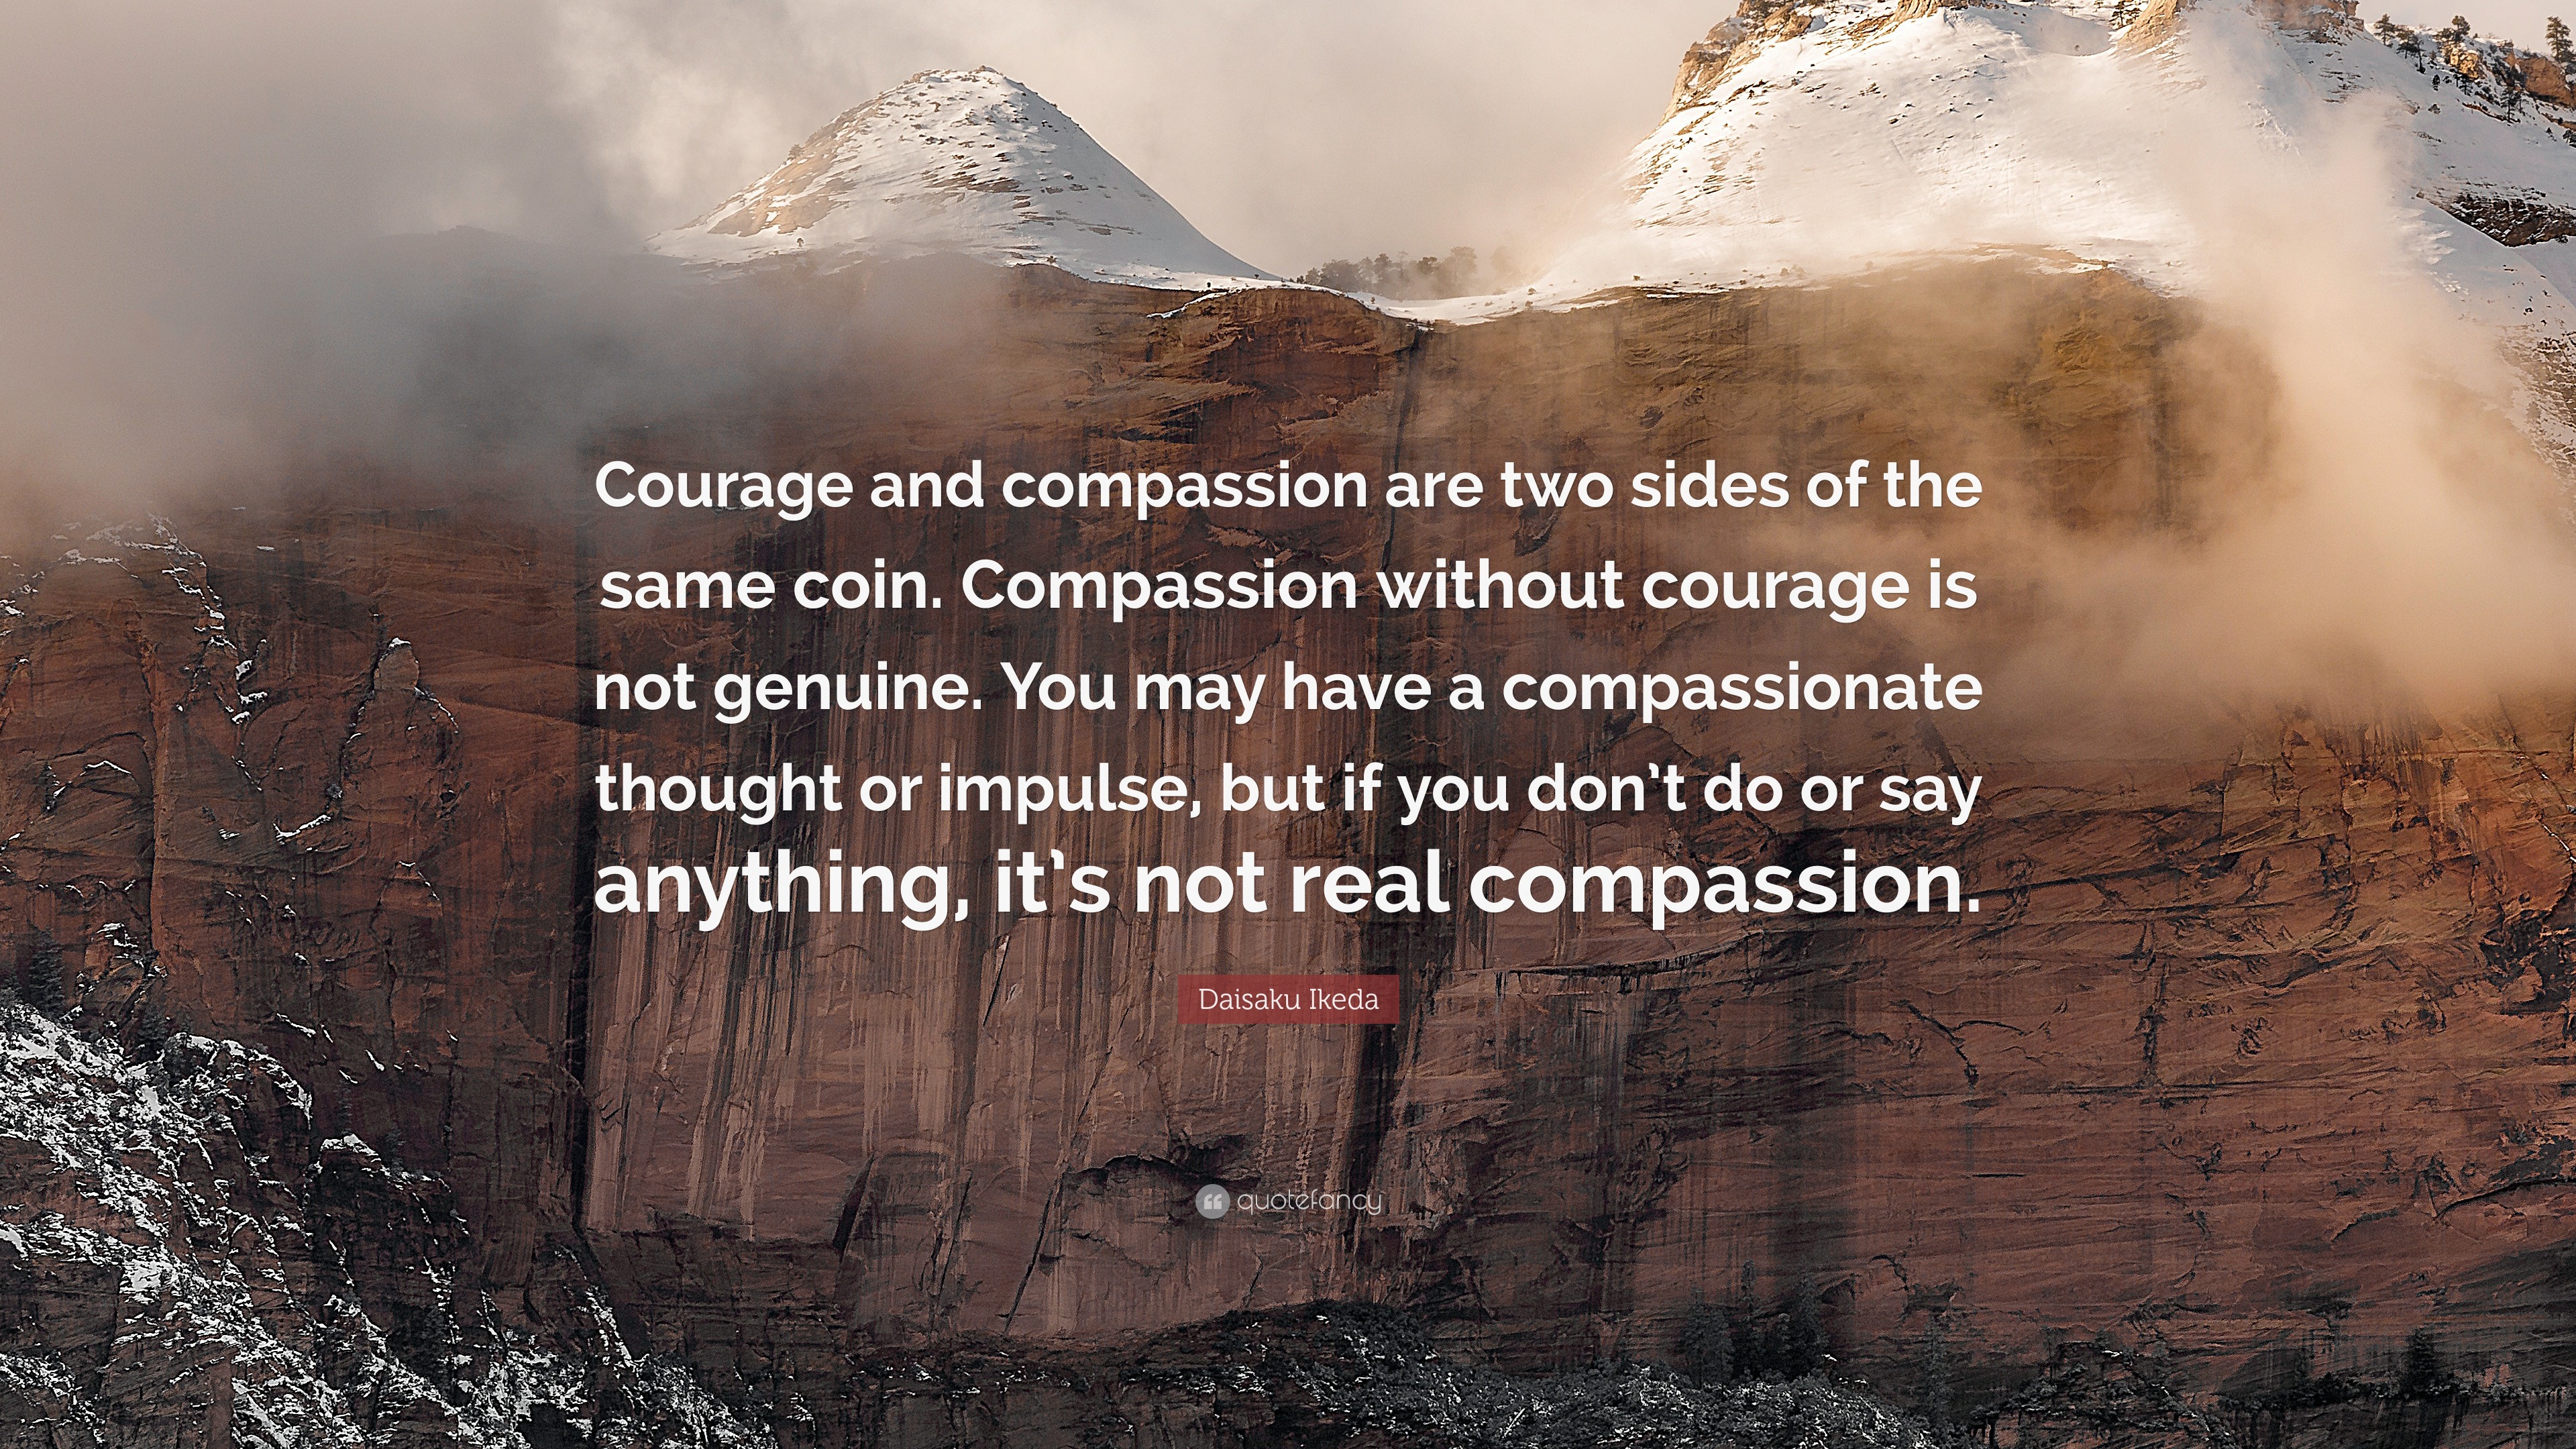 Daisaku Ikeda Quote Courage And Compassion Are Two Sides Of The